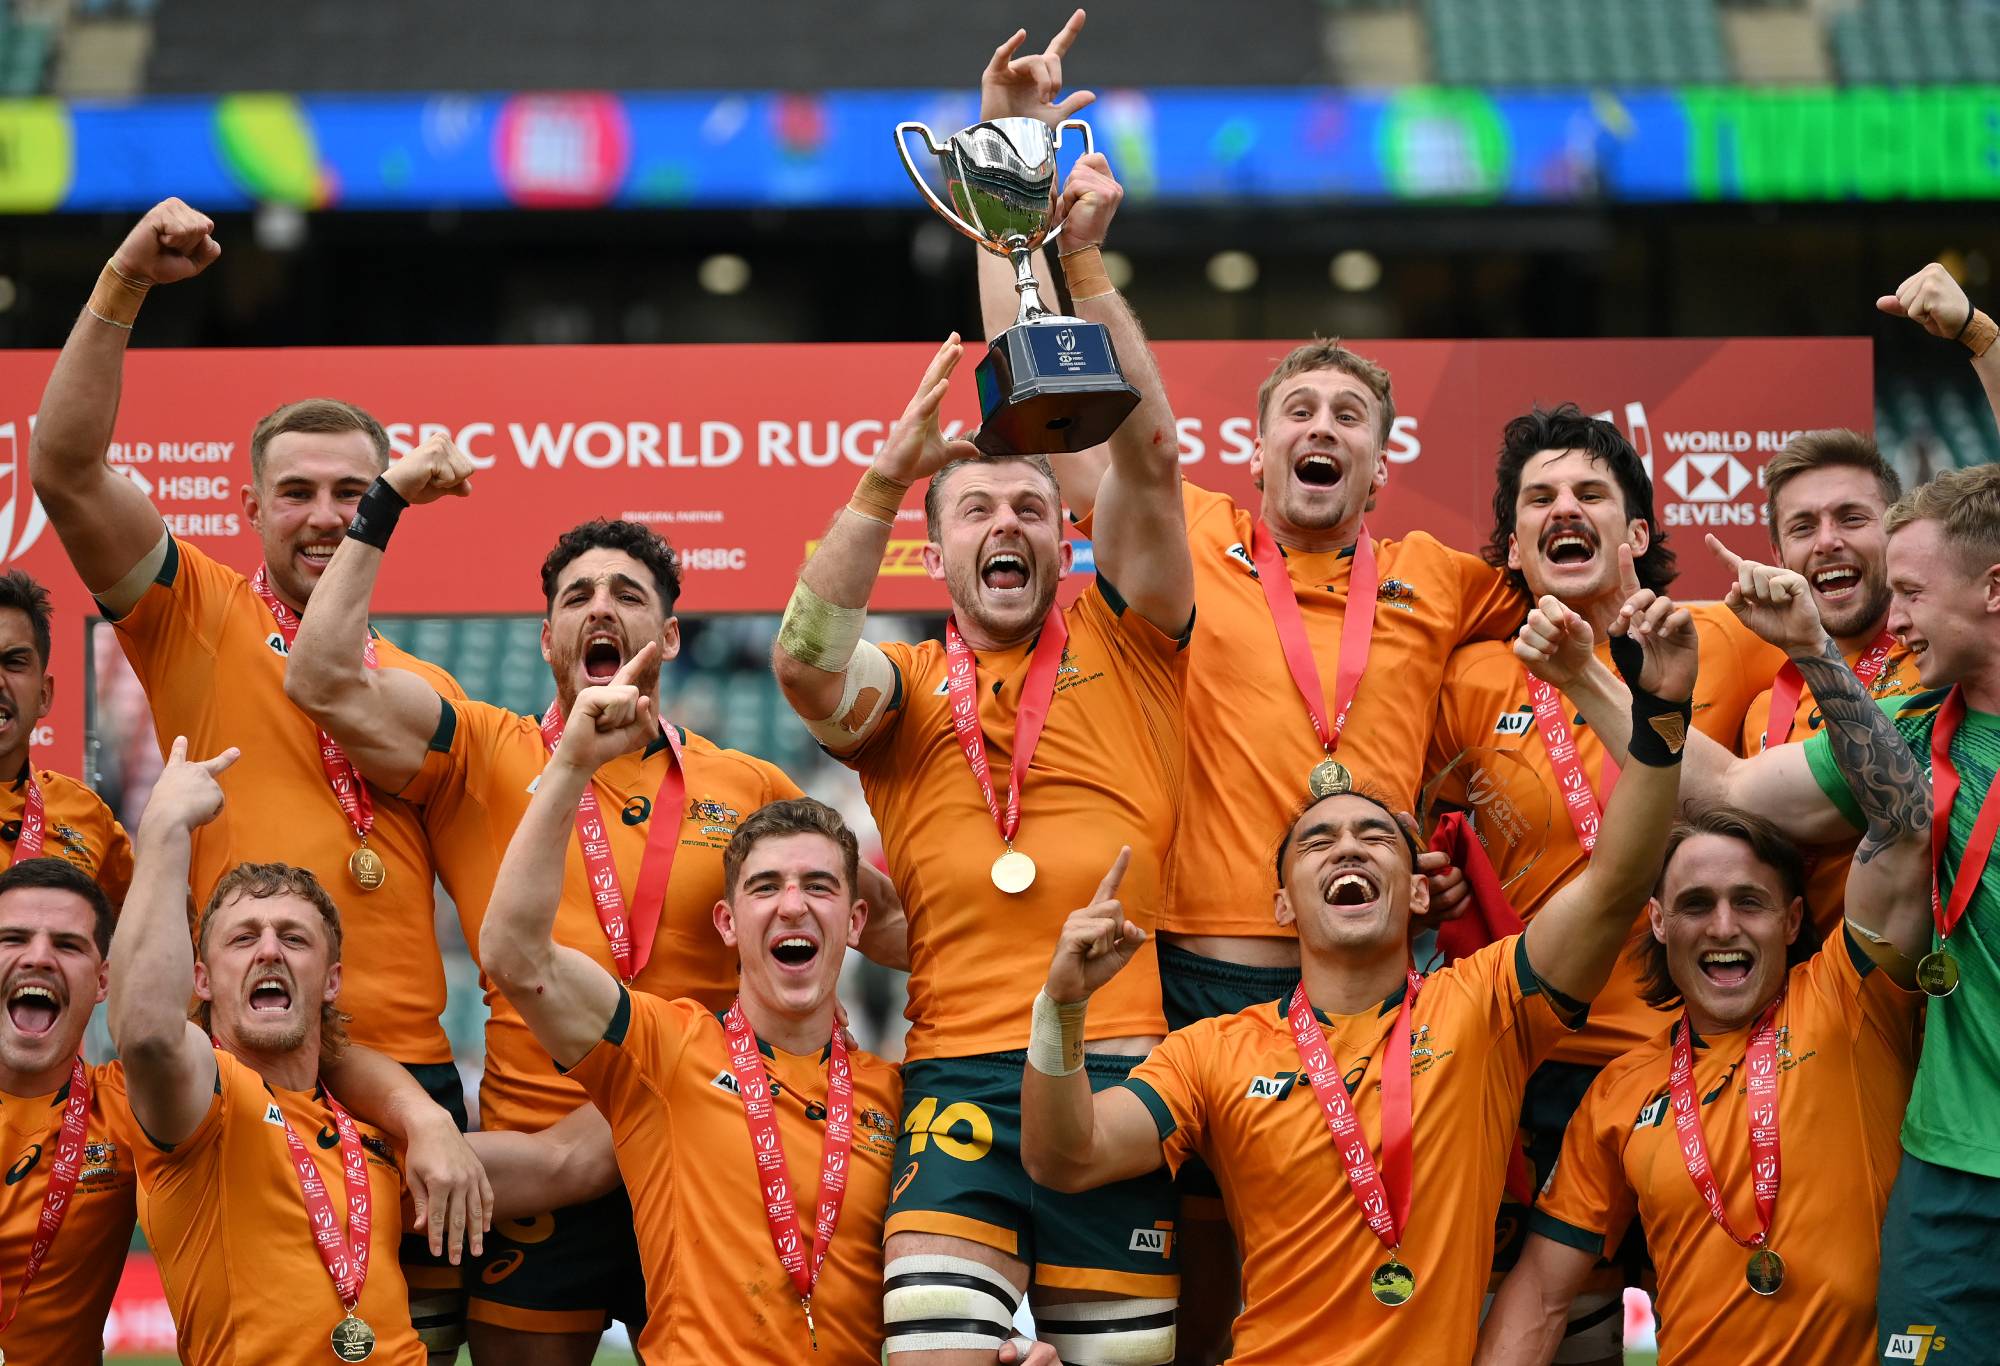 Nick Malouf of Australia (c) lifts the trophy and celebrates with his team mates after the Final between New Zealand and Australia on day two of the HSBC London Sevens at Twickenham Stadium on May 29, 2022 in London, England. (Photo by Dan Mullan - RFU/The RFU Collection via Getty Images)